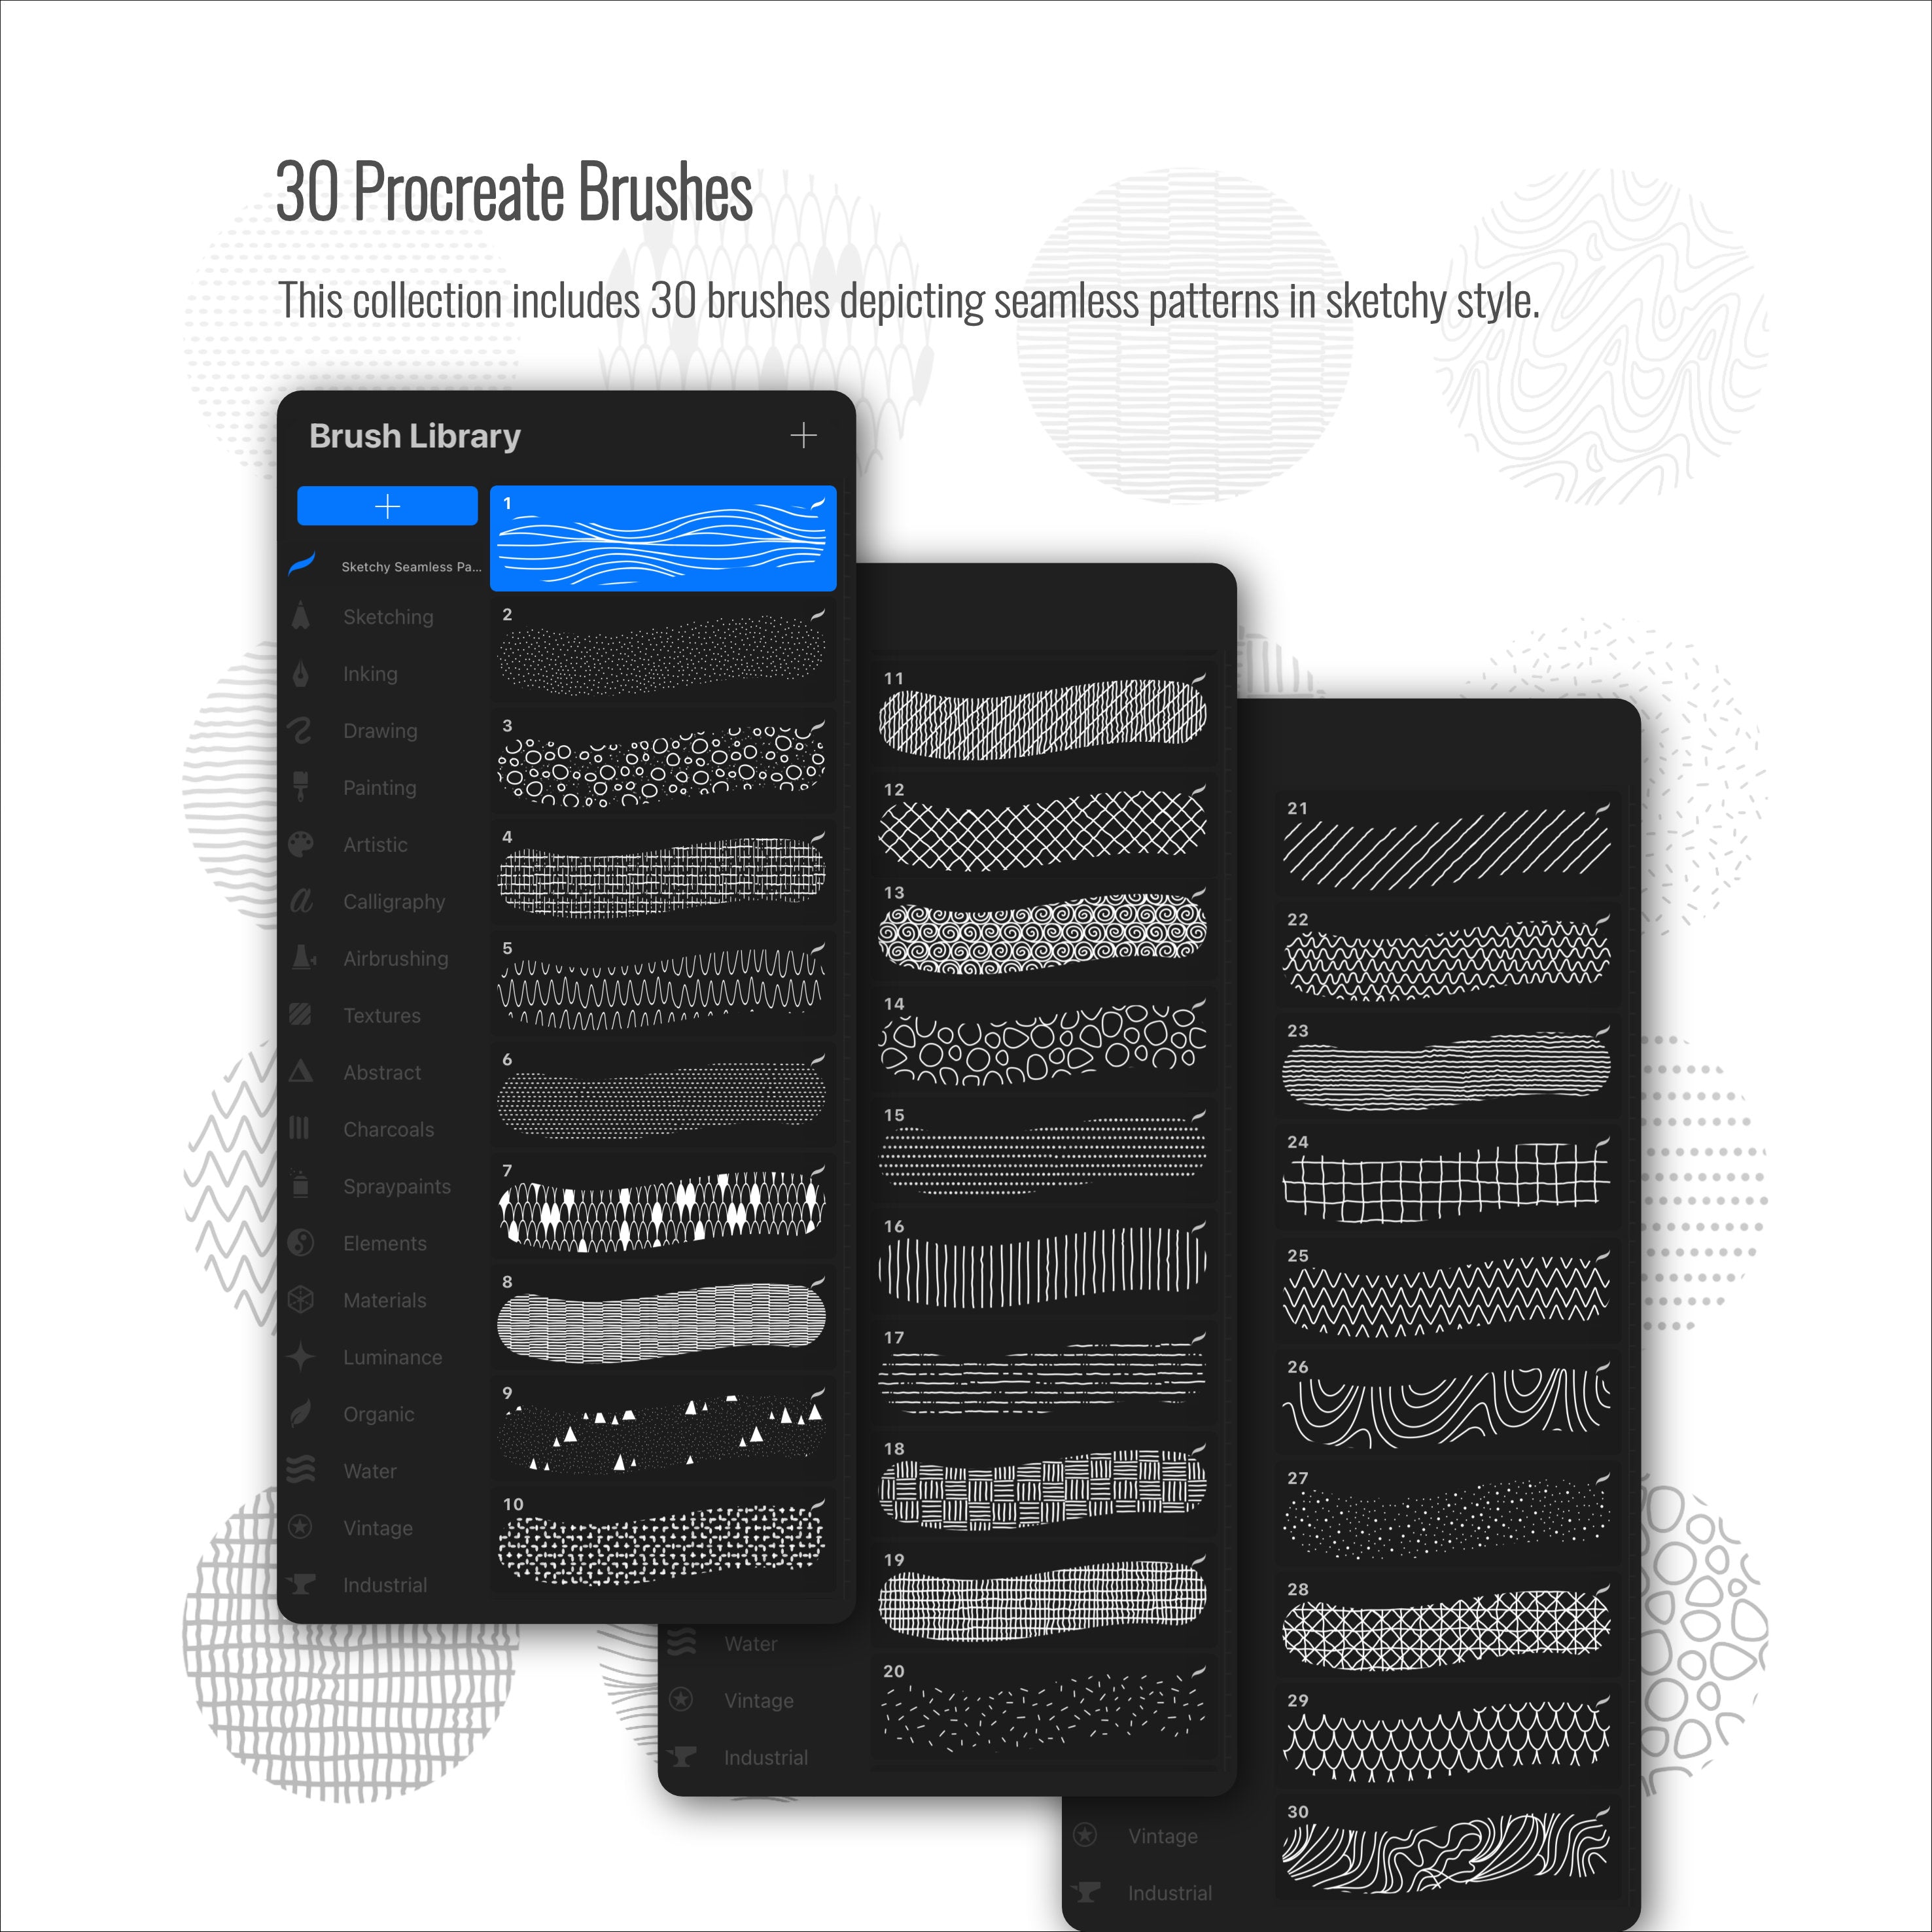 Procreate Sketchy Seamless Patterns Brushset PNG - Toffu Co